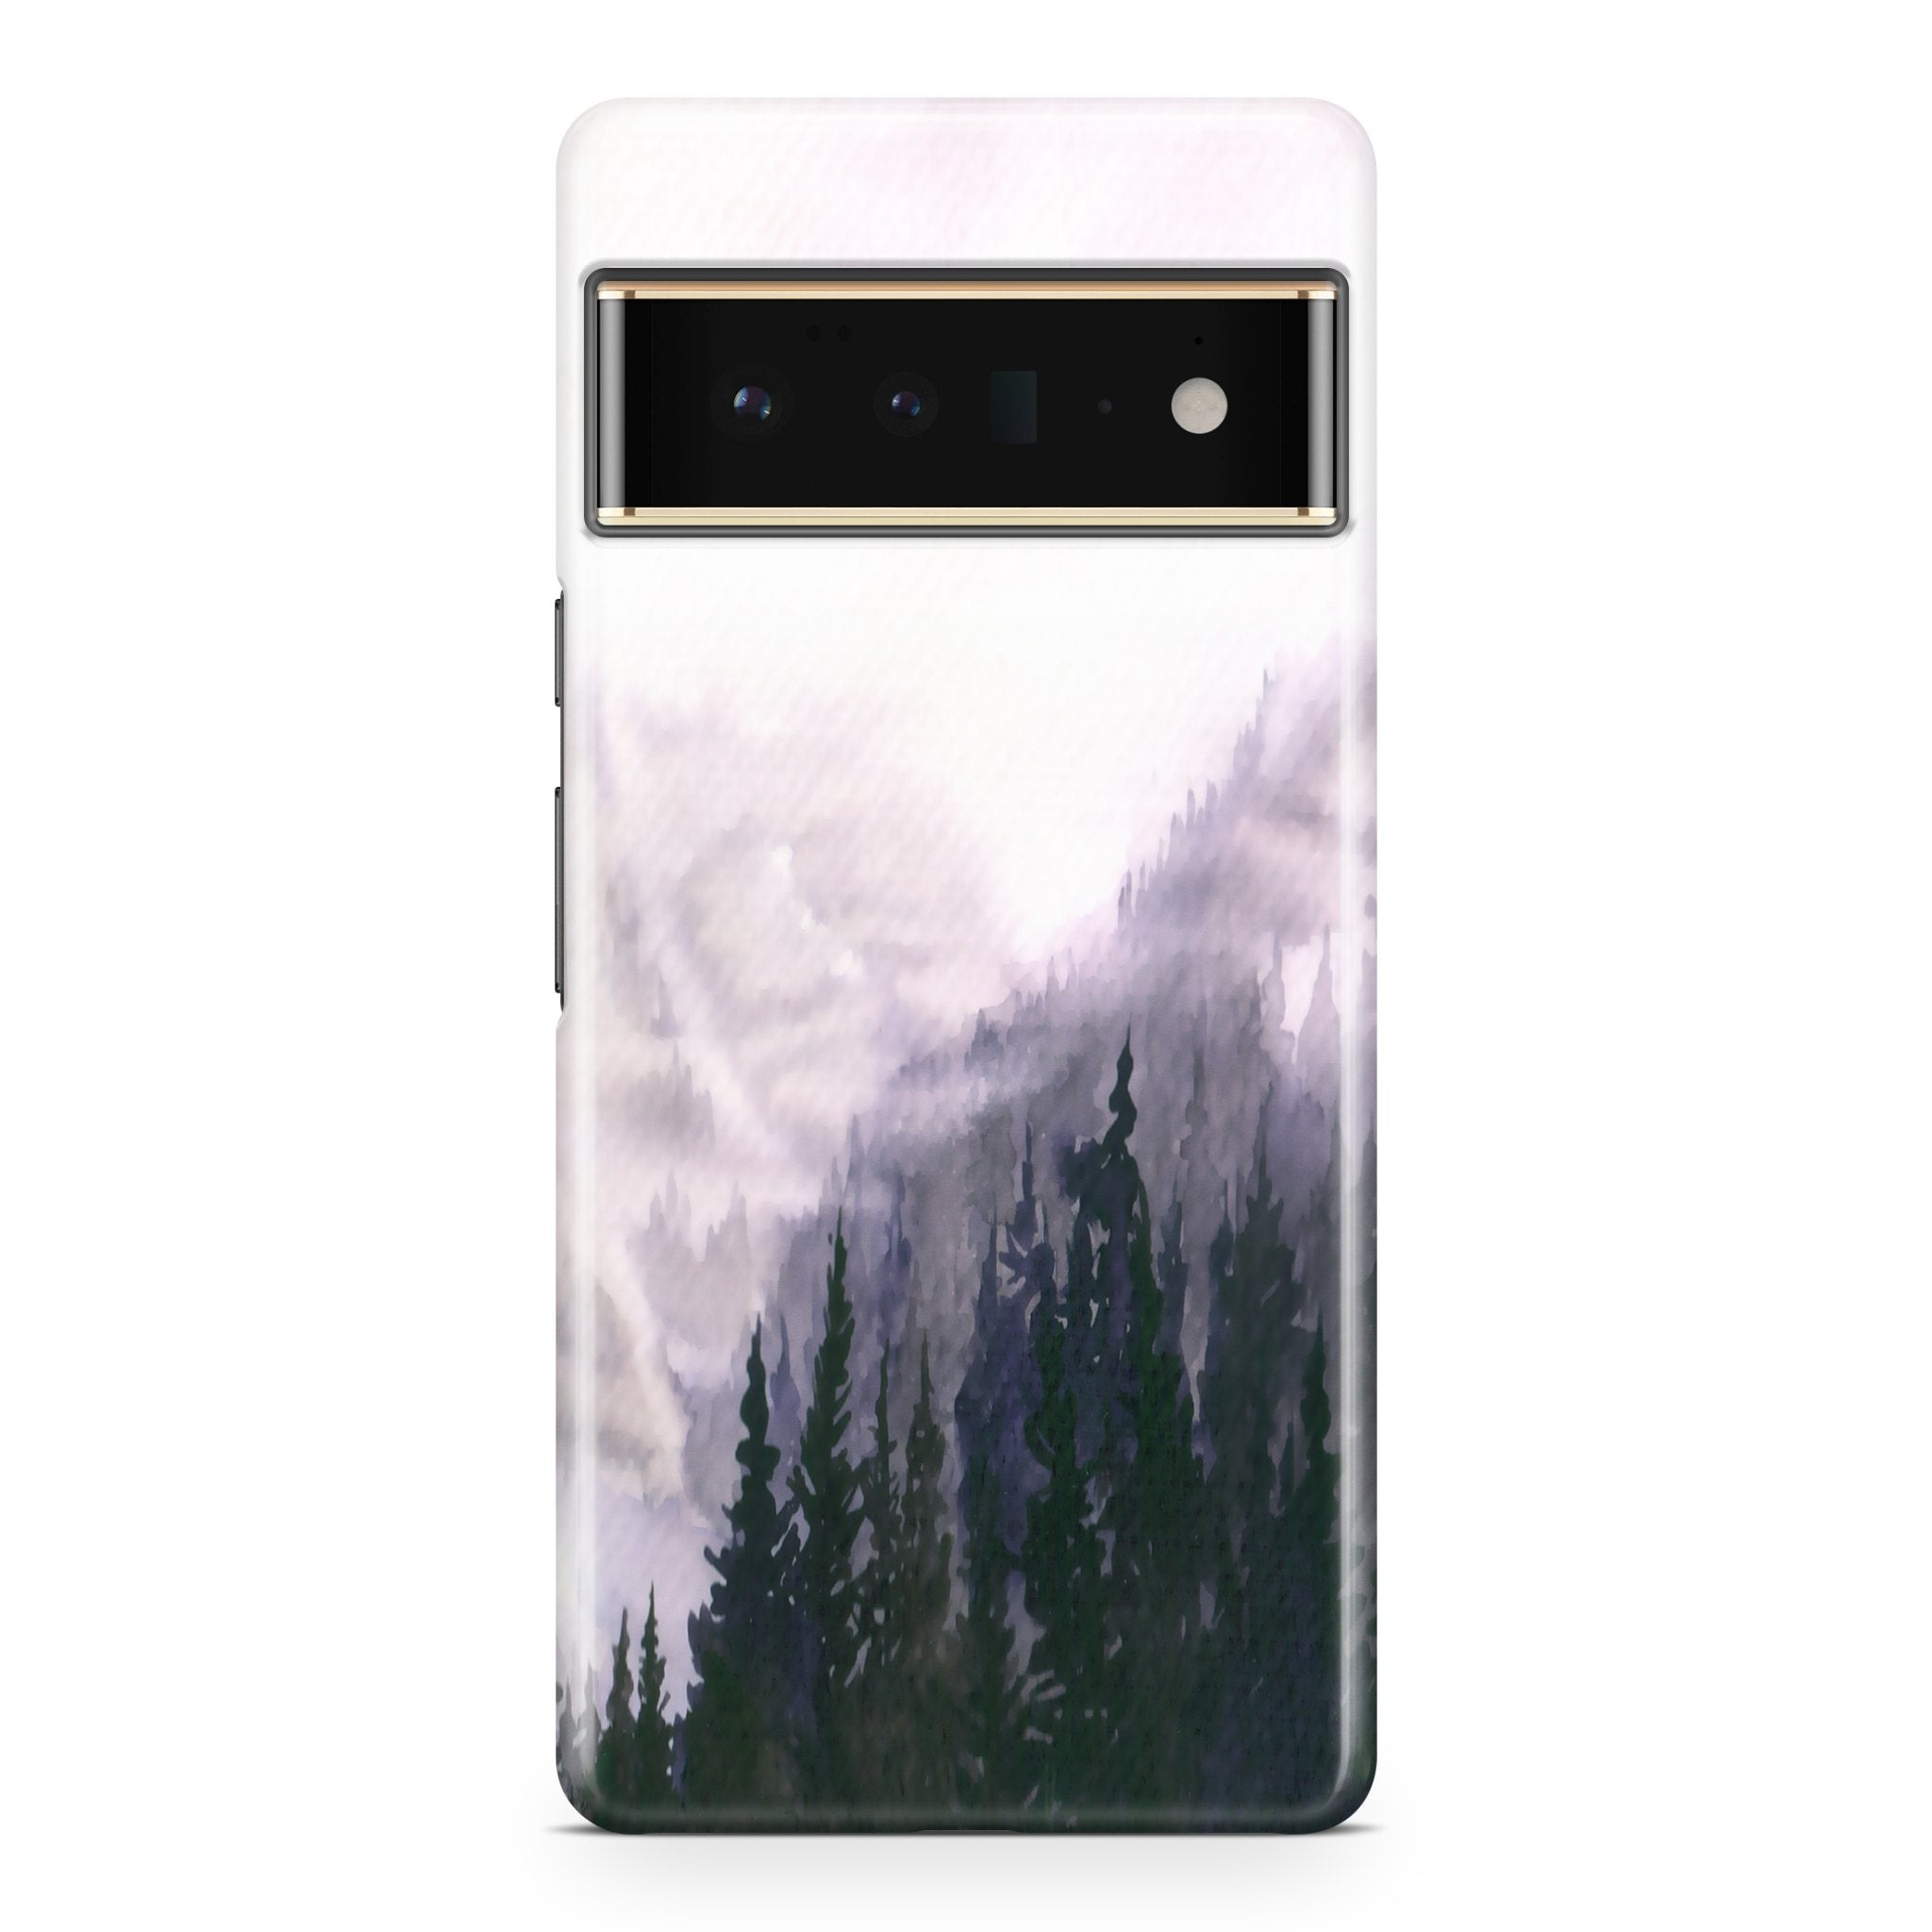 Foggy Morning - Google phone case designs by CaseSwagger